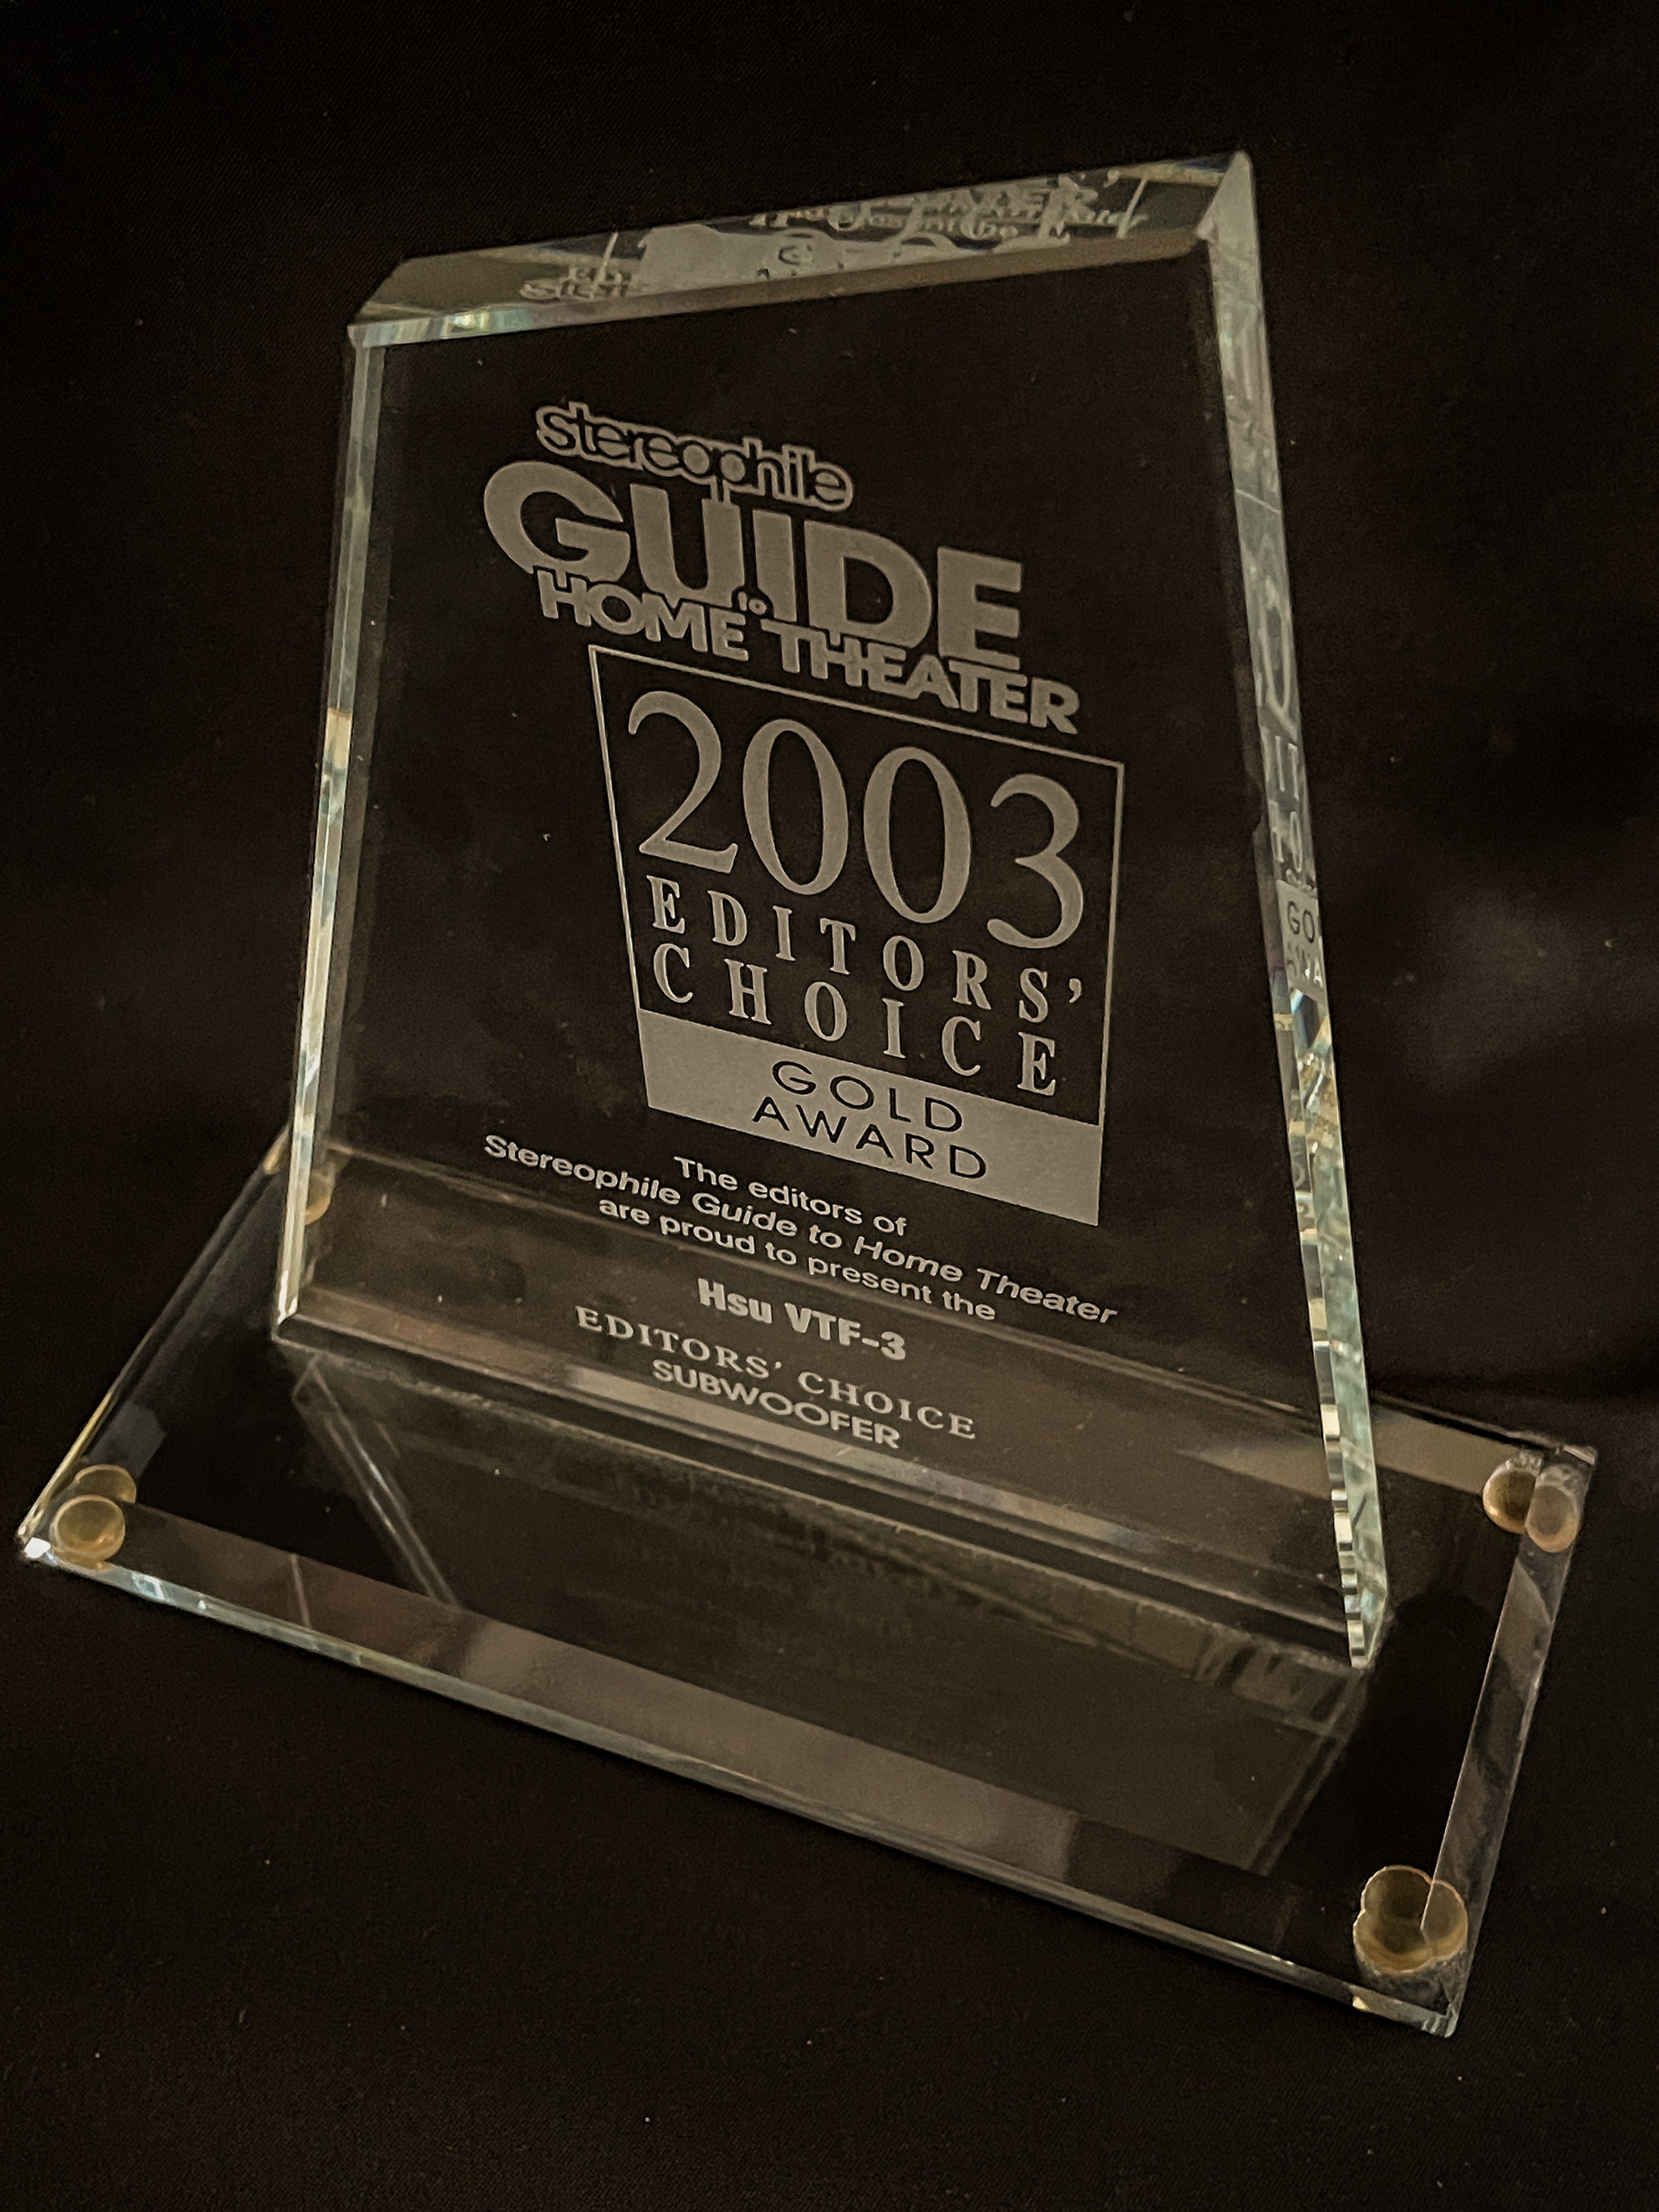 2003 Editor's Choice Gold Award - Stereophile Guide to Home Theater